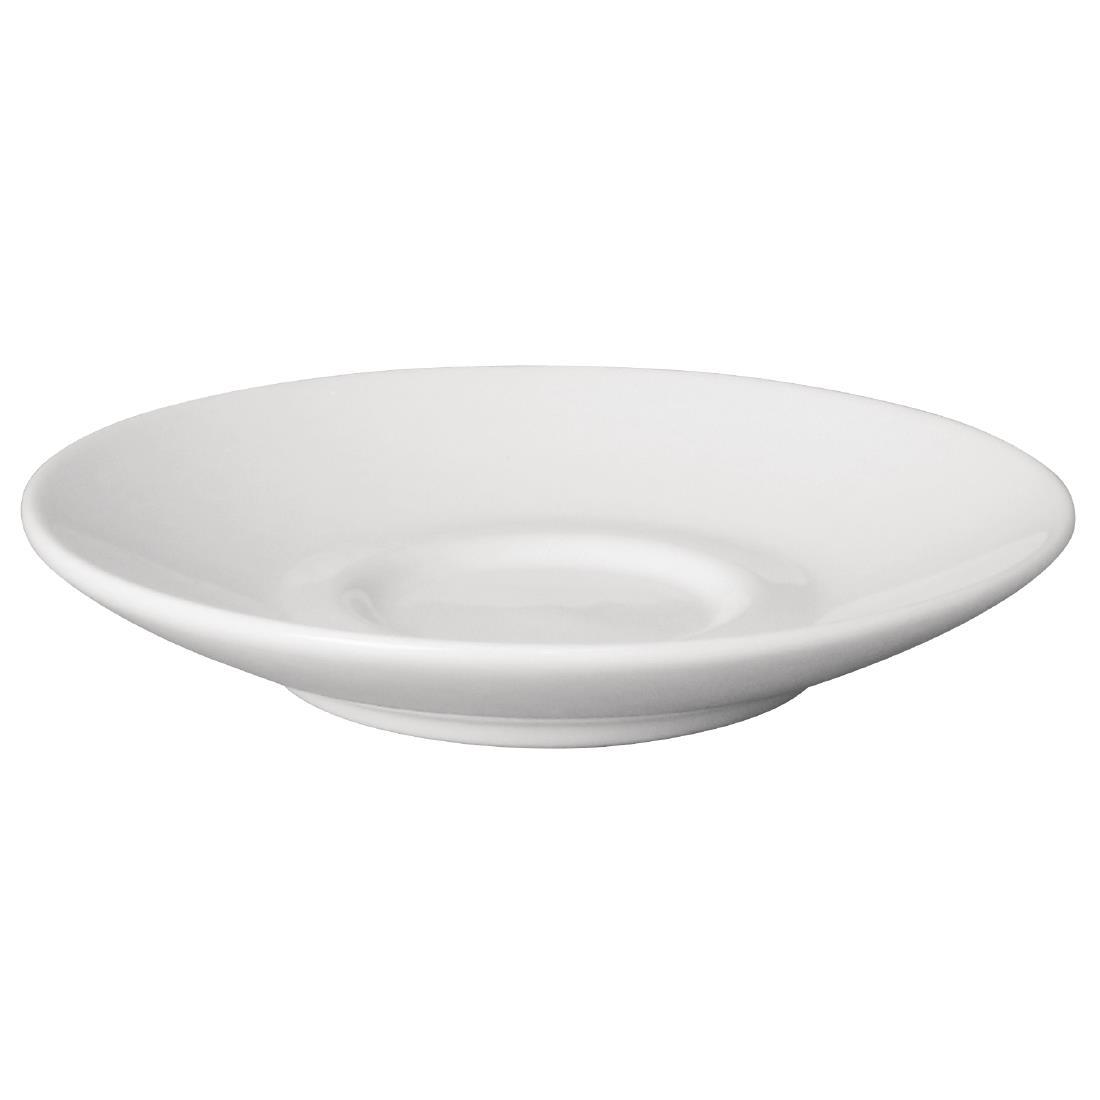 Olympia Cafe Espresso Saucers White 116.5mm (Pack of 12) - GK086  - 2